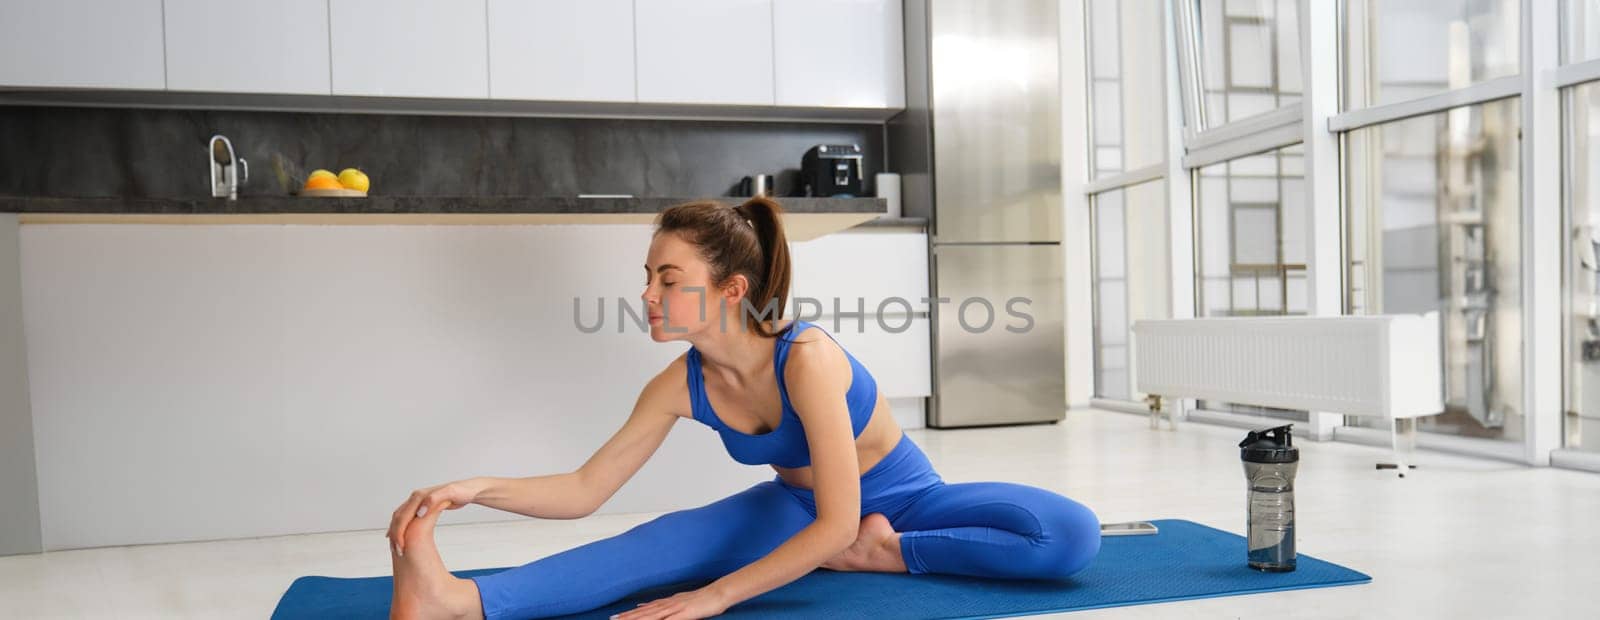 Fitness and workout concept. Young woman stretching her legs, doing exercises at home on yoga mat, doing splits on floor in living room.